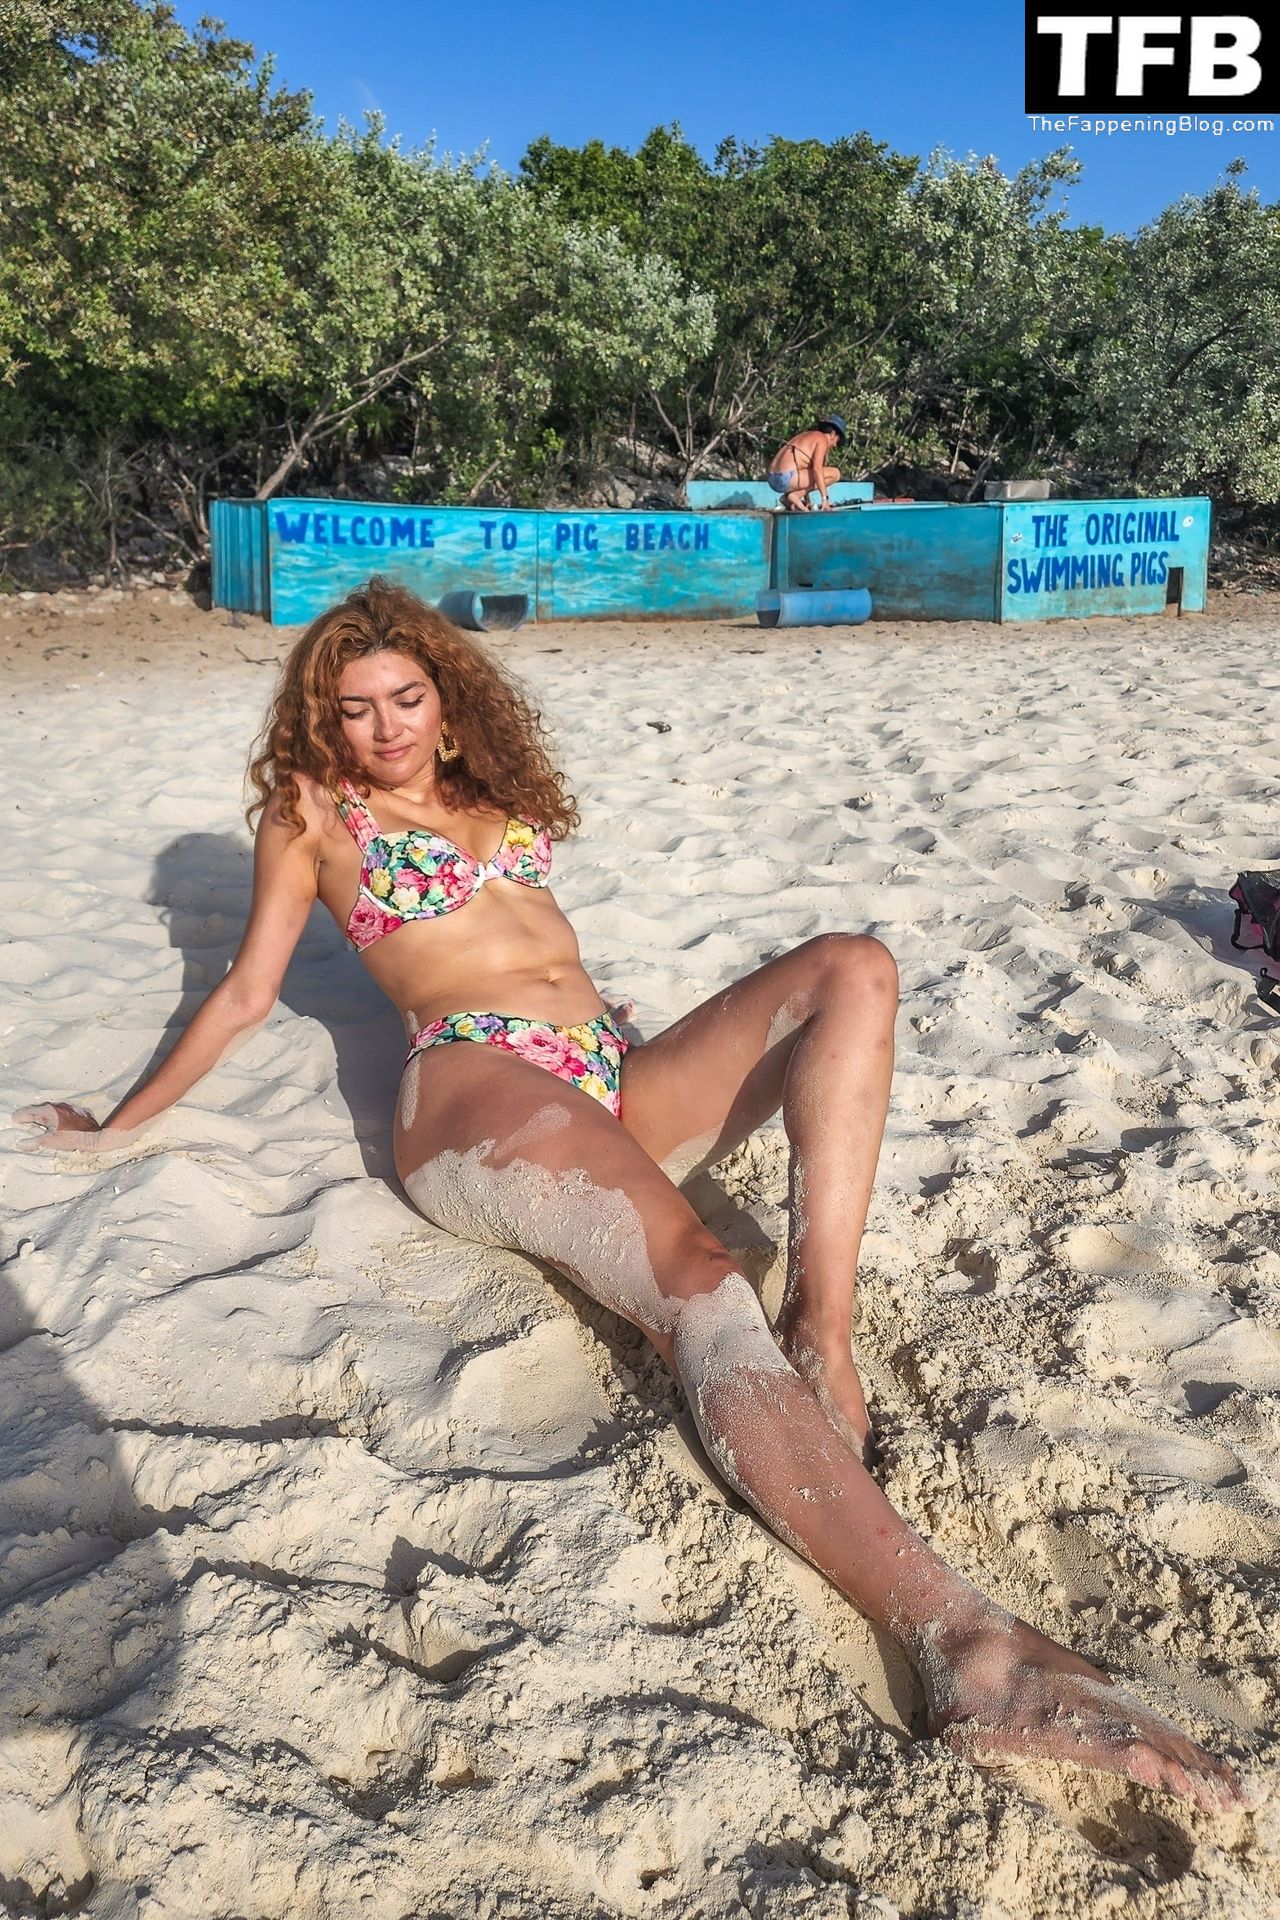 Blanca Blanco Visits the World Famous Pig Beach in the Bahamas (29 Photos)